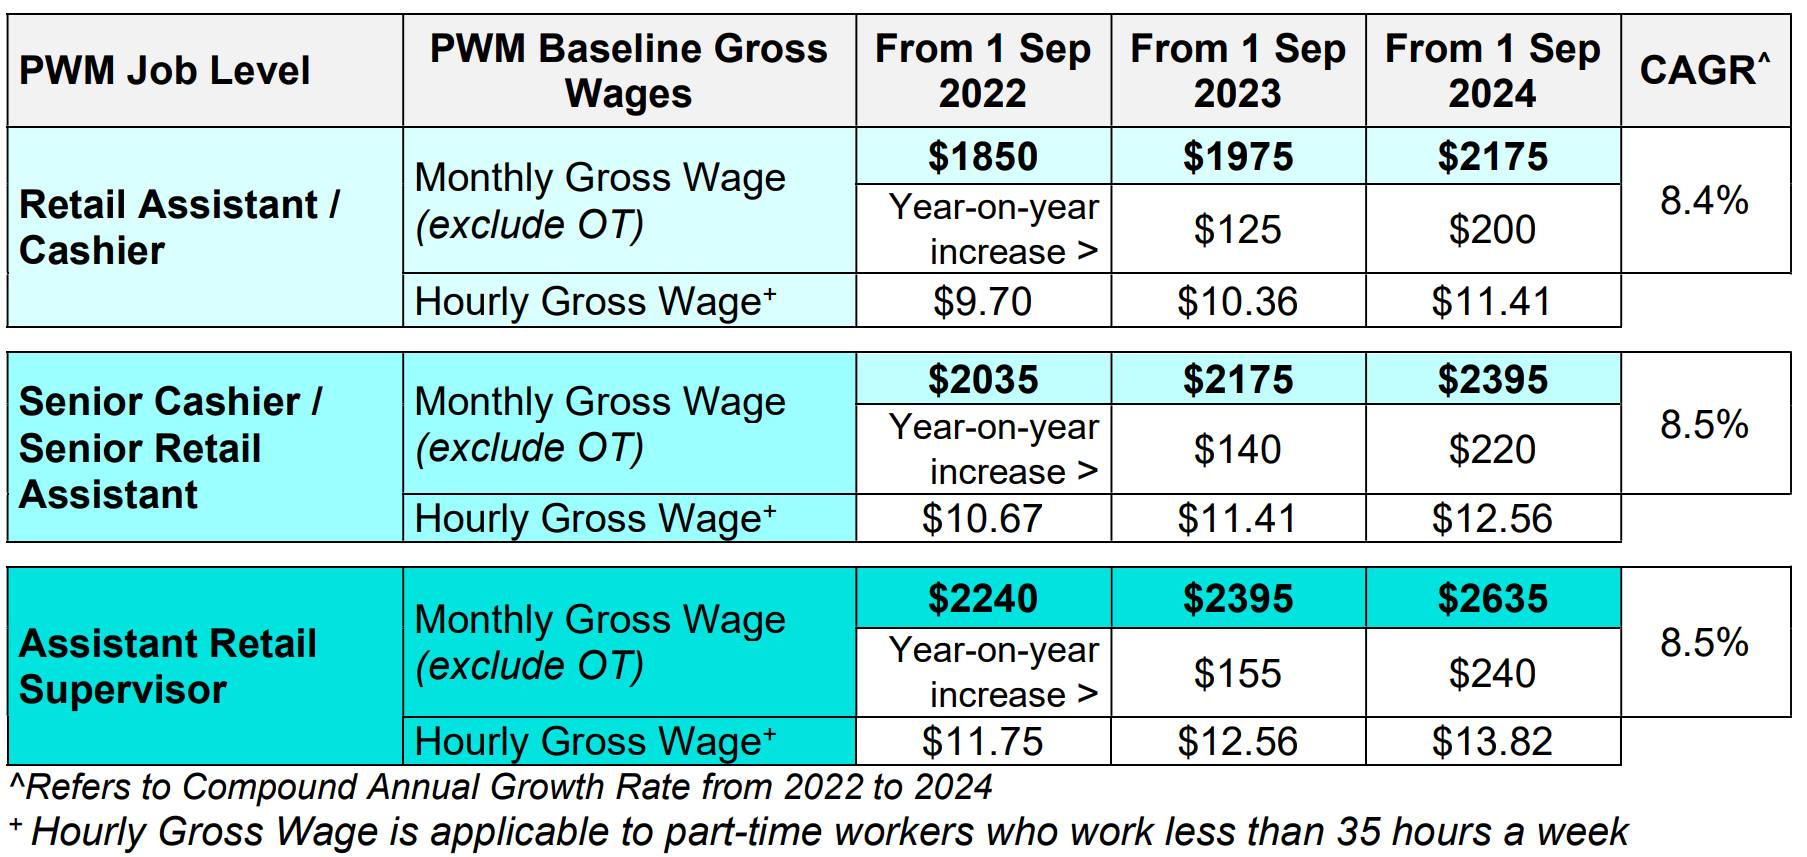 Retail PWM - Baseline Gross Wages